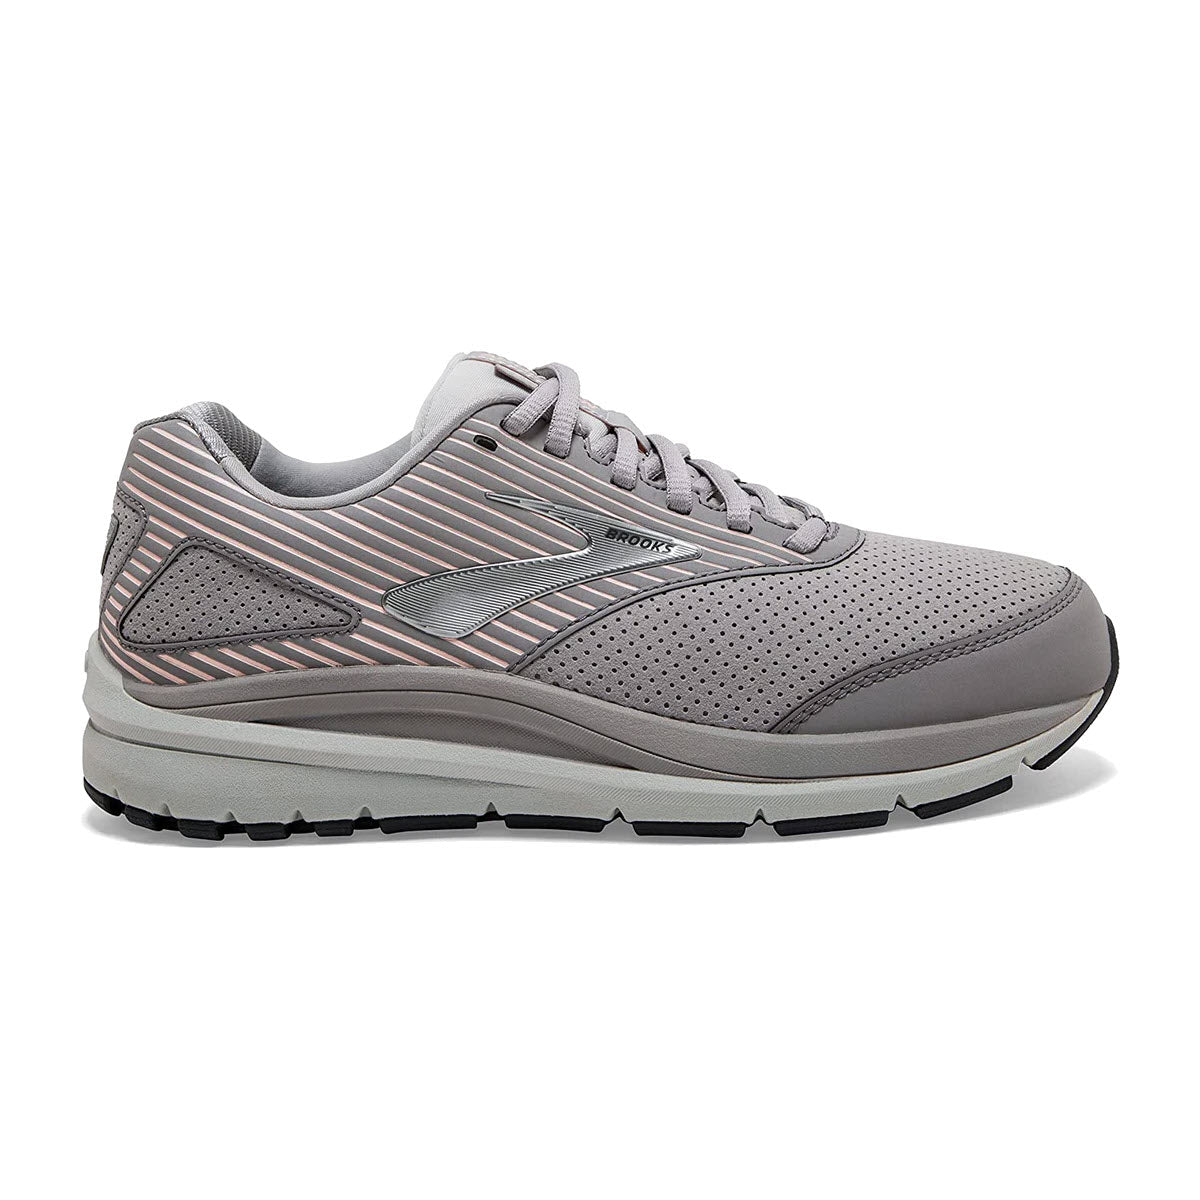 BROOKS ADDICTION WALKER SUEDE ALLOY/OYSTER/PEACH - WOMENS